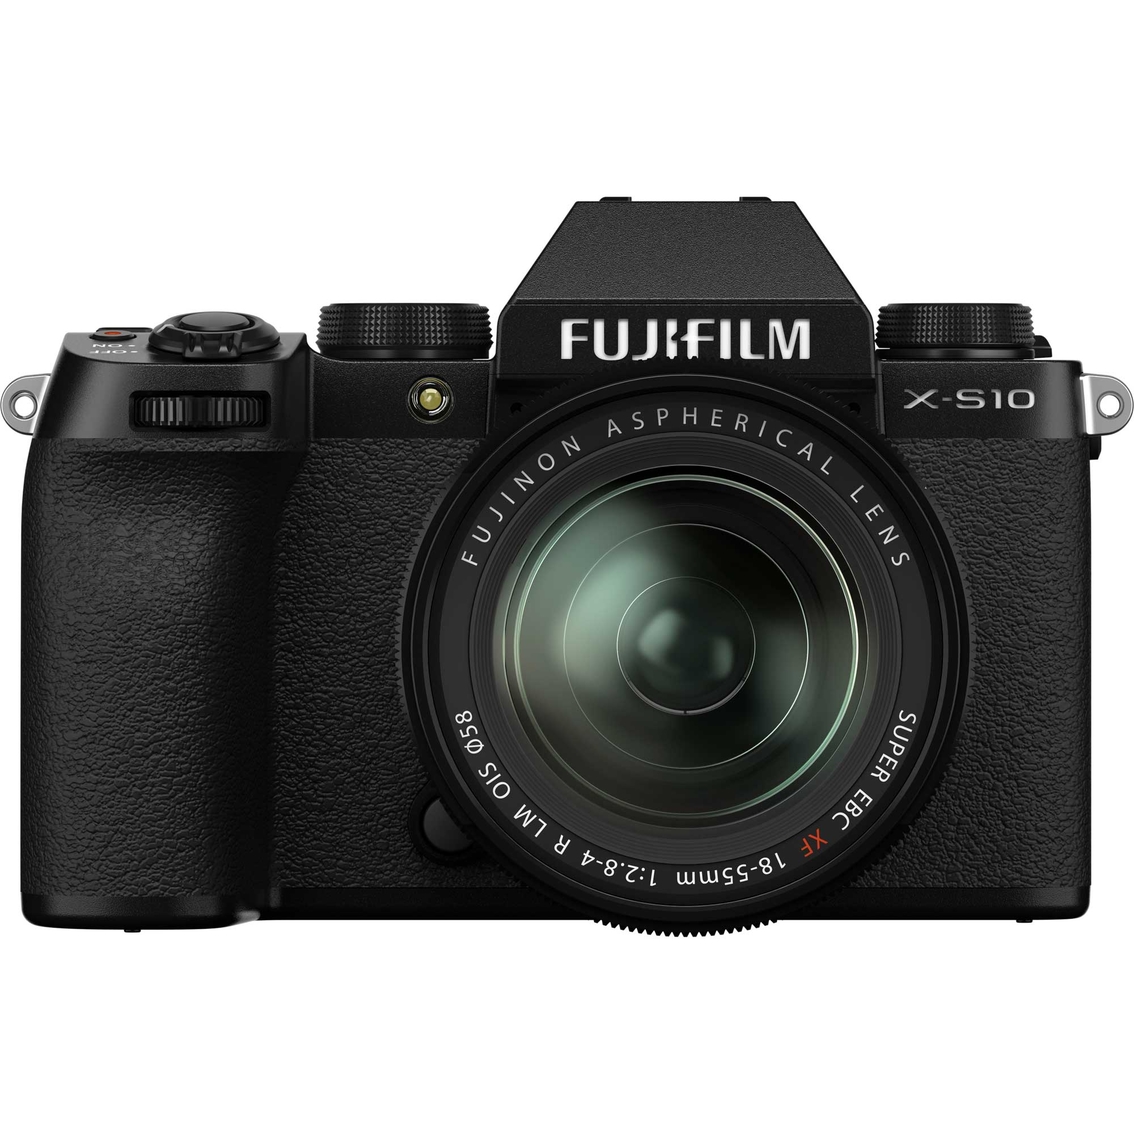 FujiFilm X S10 Body with XF 18 to 55mm Lens Kit, Black - Image 2 of 10